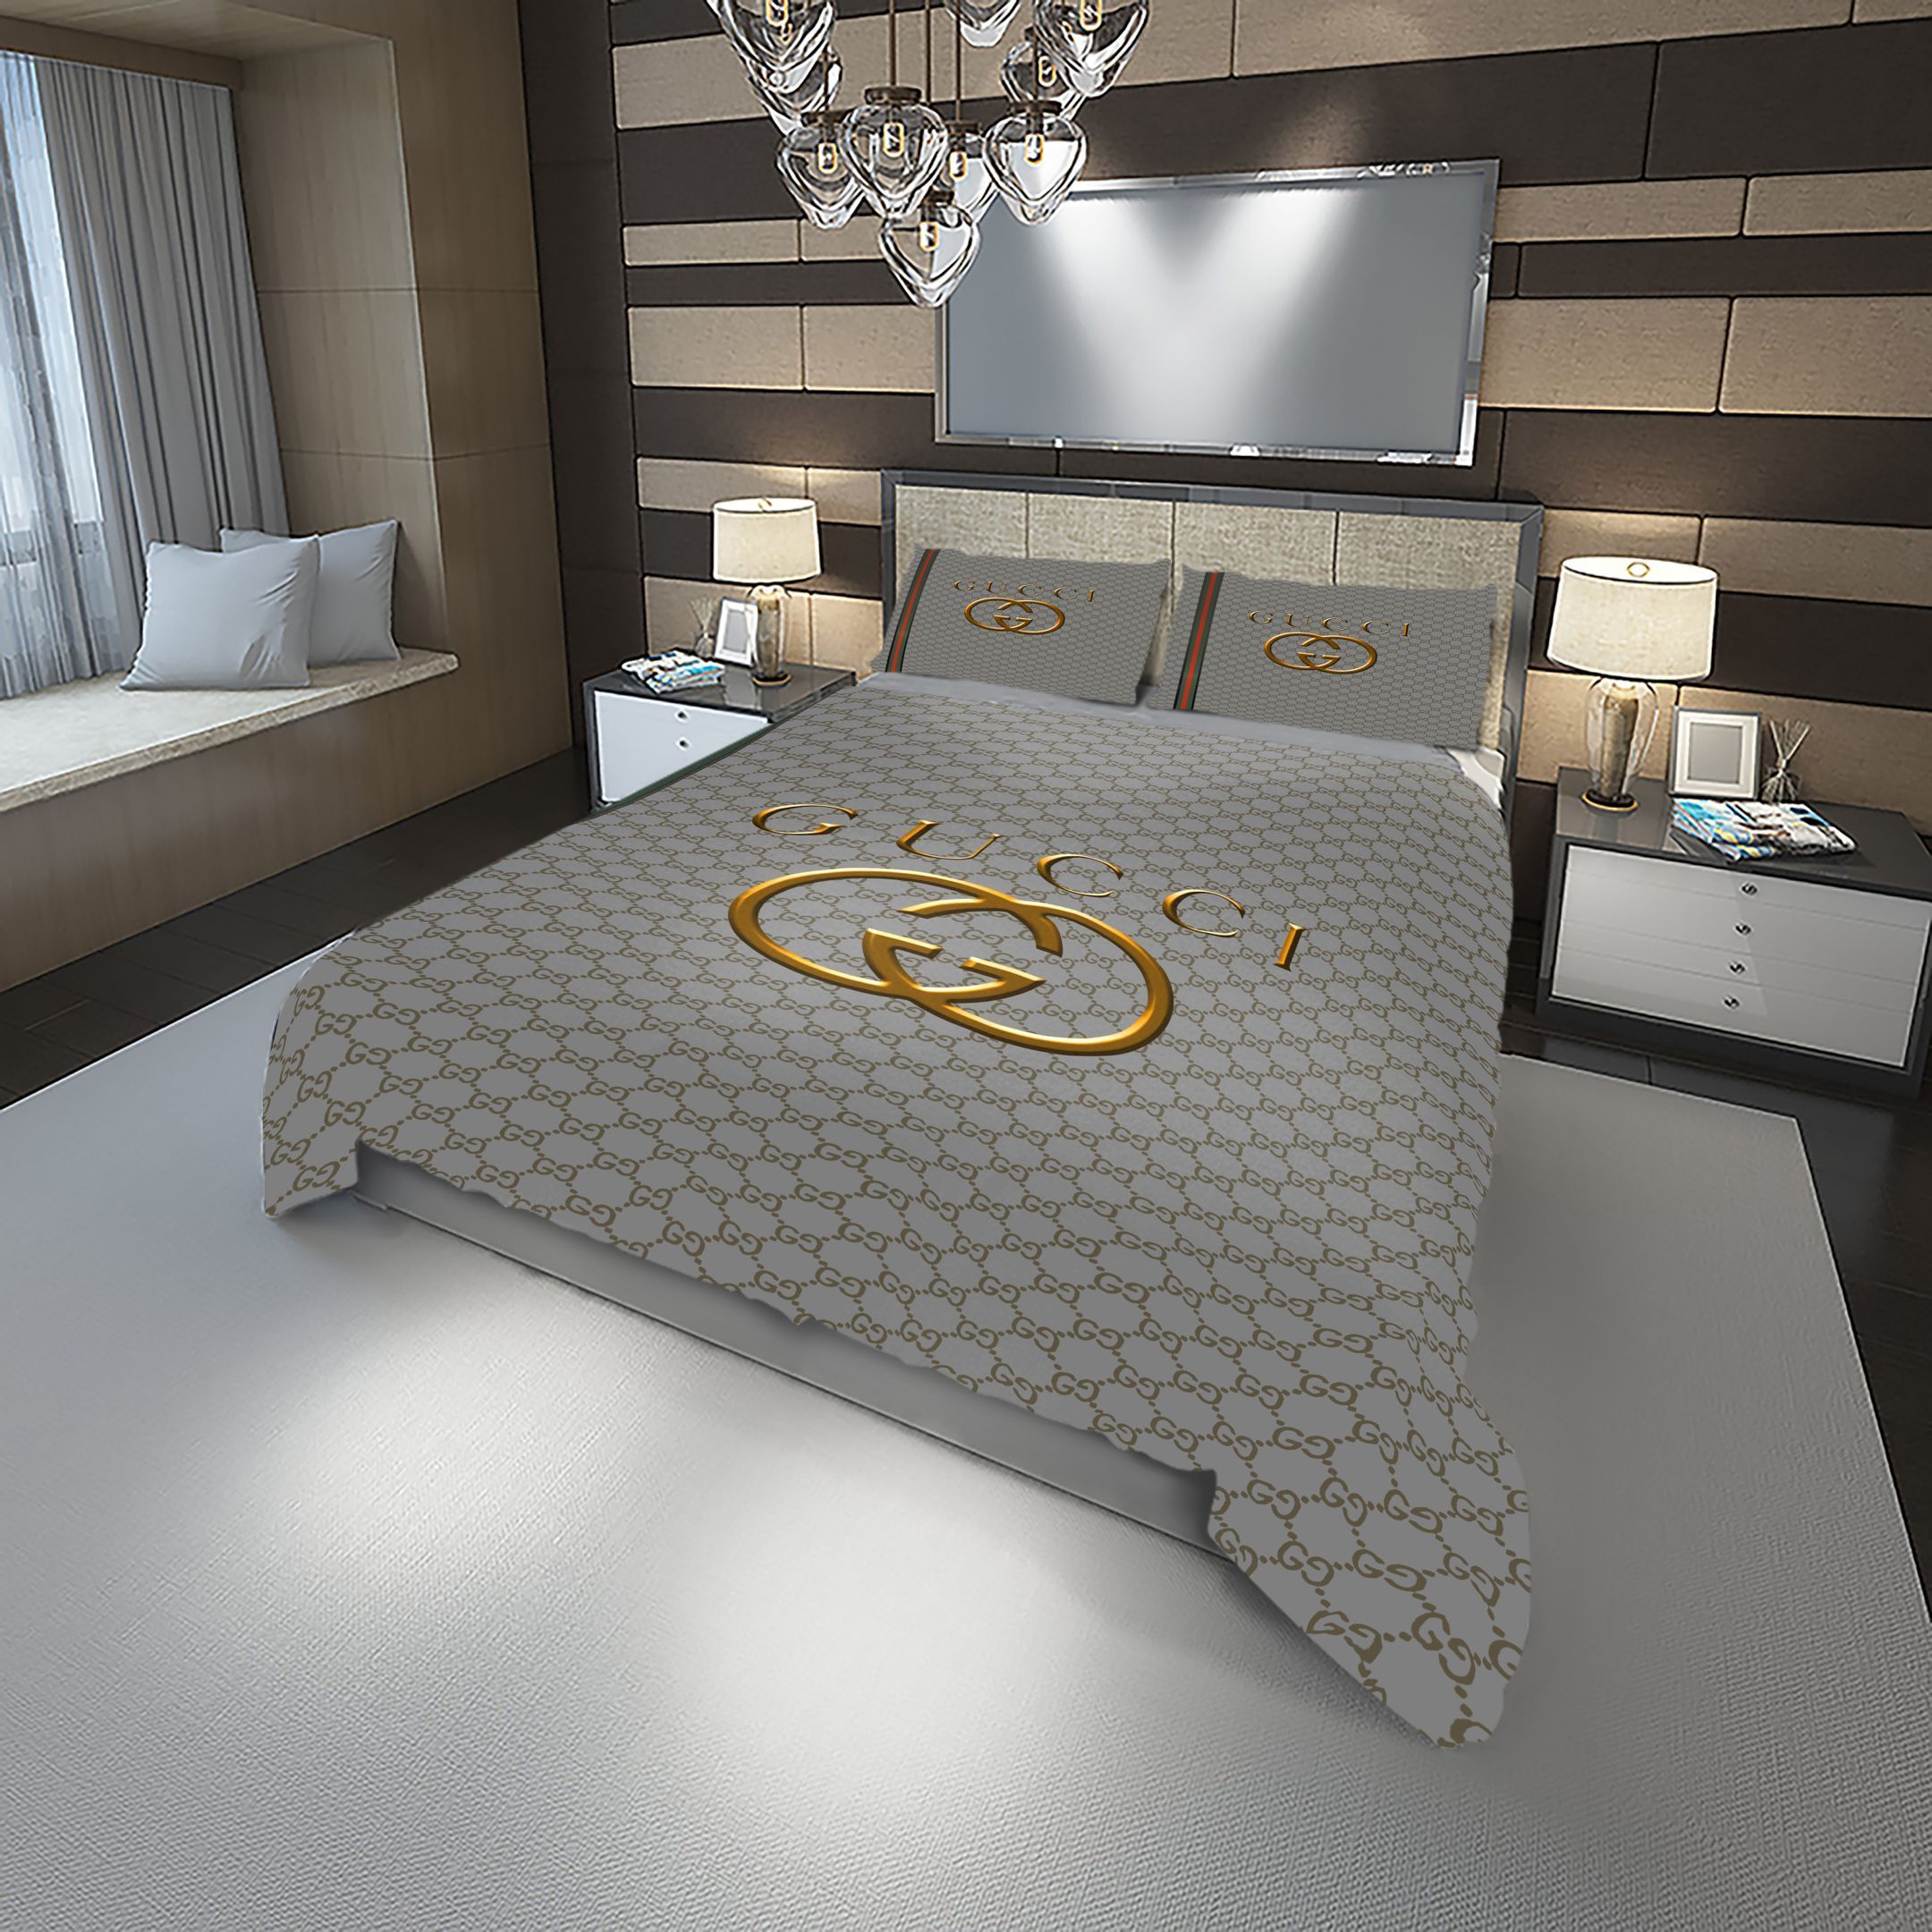 Let me show you about some luxury brand bedding set 2022 111